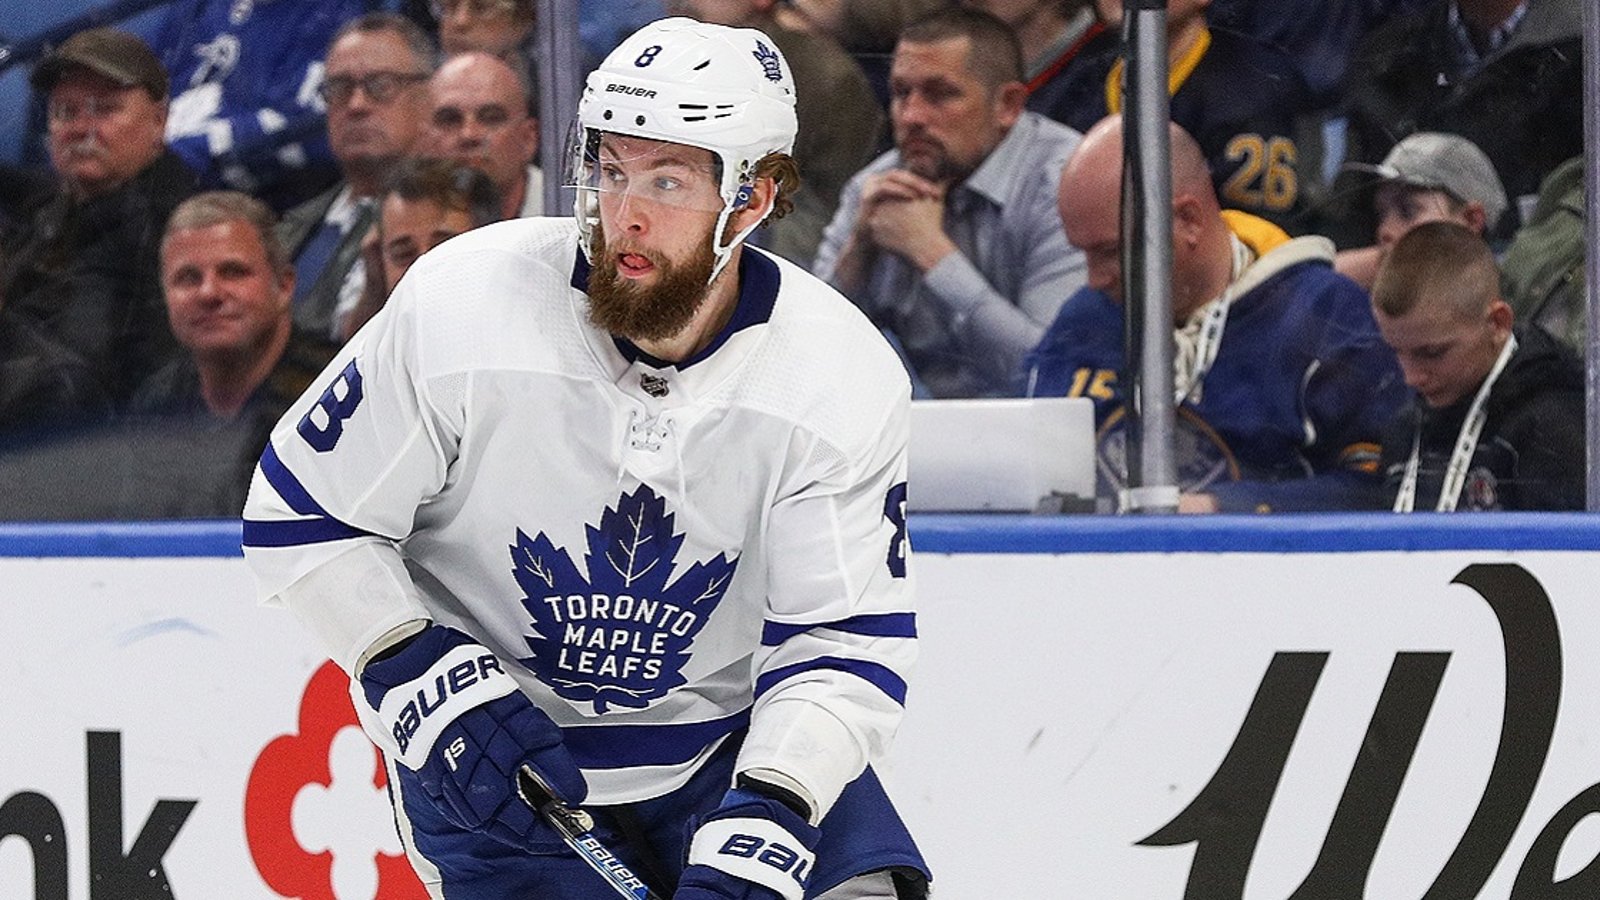 Jake Muzzin confirms that he and the Leafs are 'close' to a new deal.